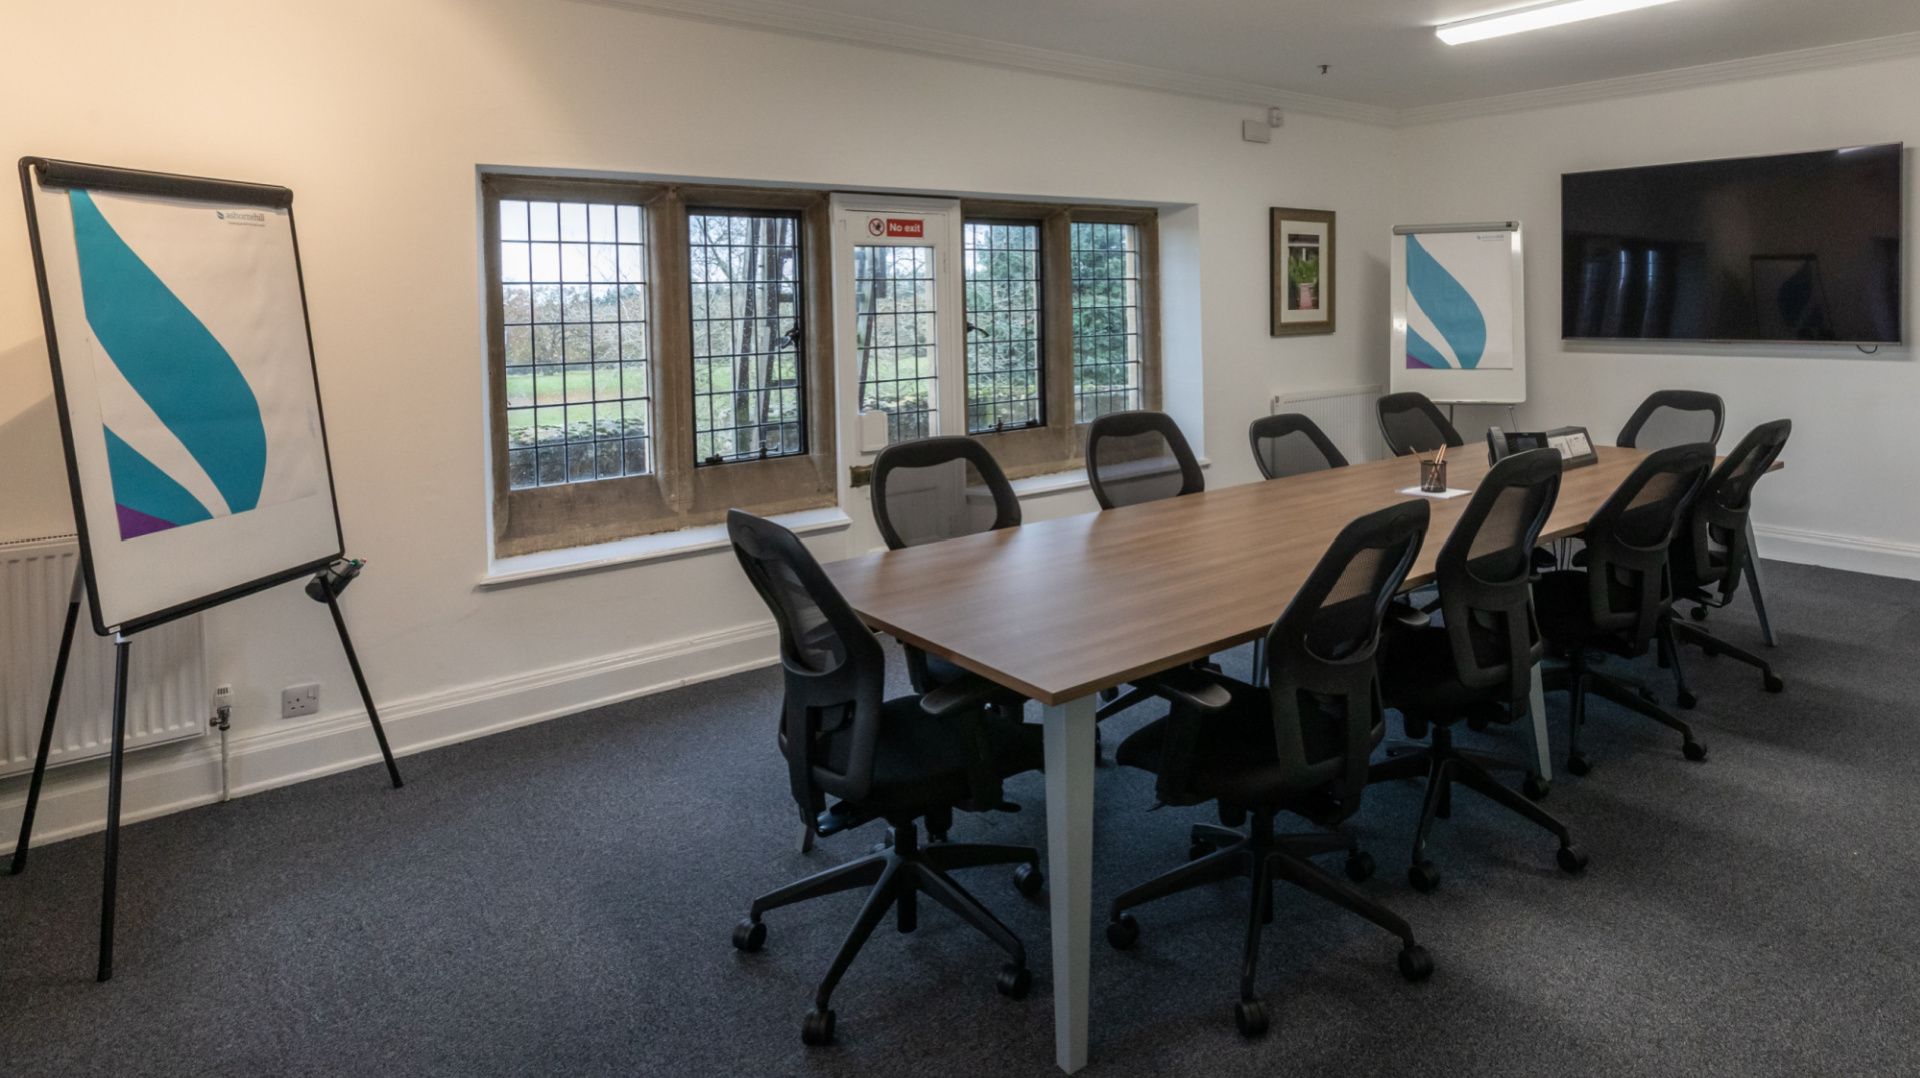 Ashorne Hill saves you time booking your small meeting space